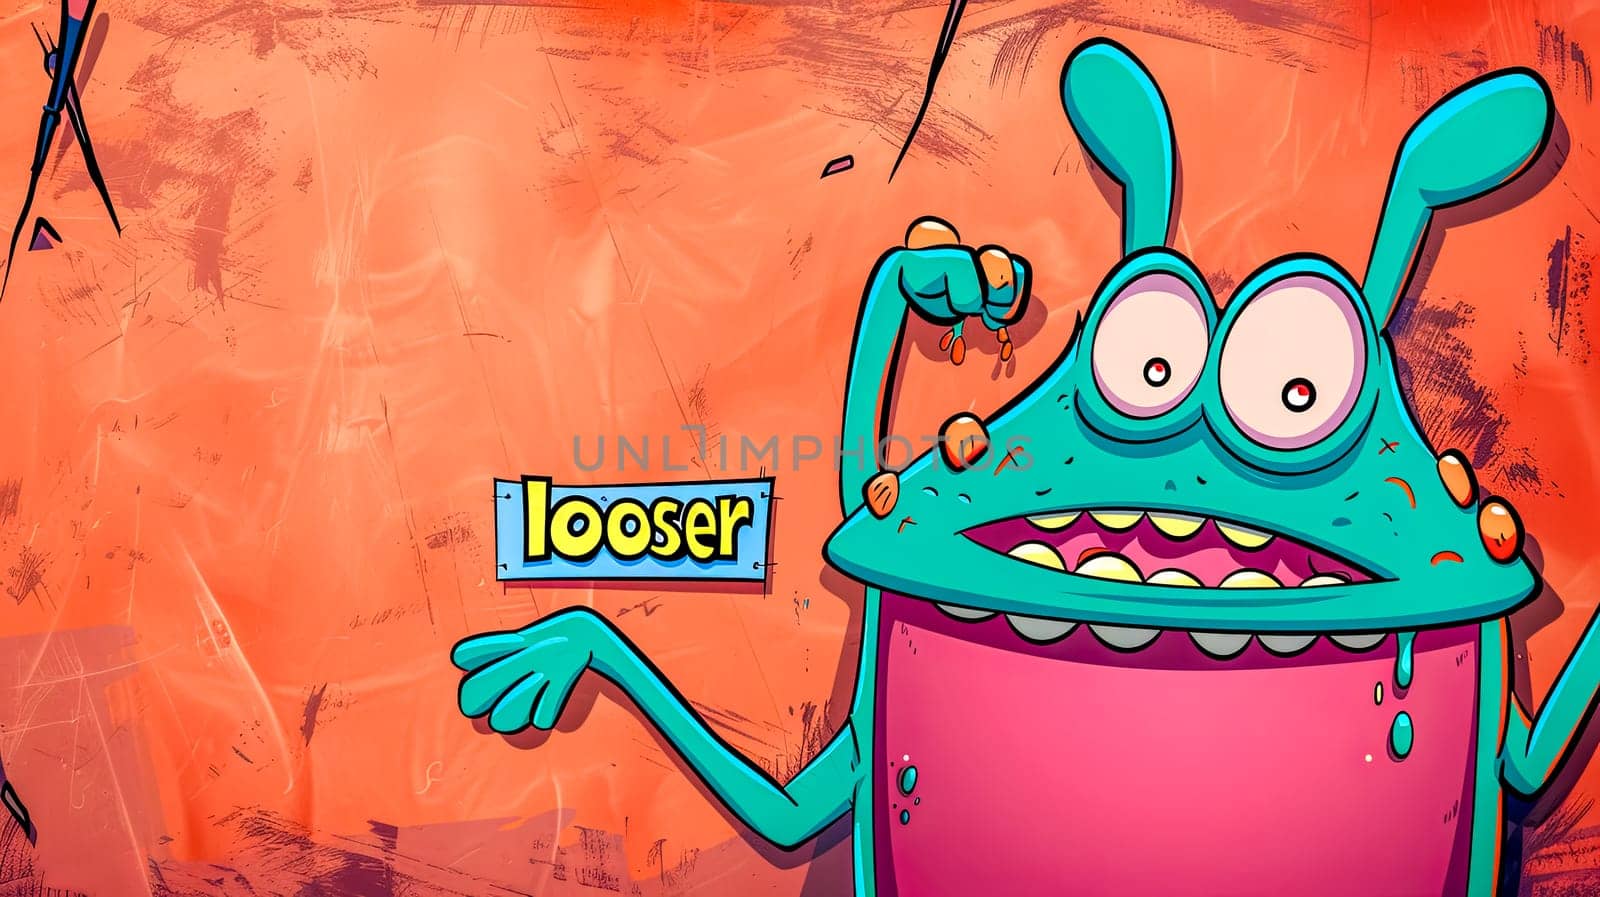 Colorful cartoon monster with quirky expression holding a sign that reads looser on a vibrant background